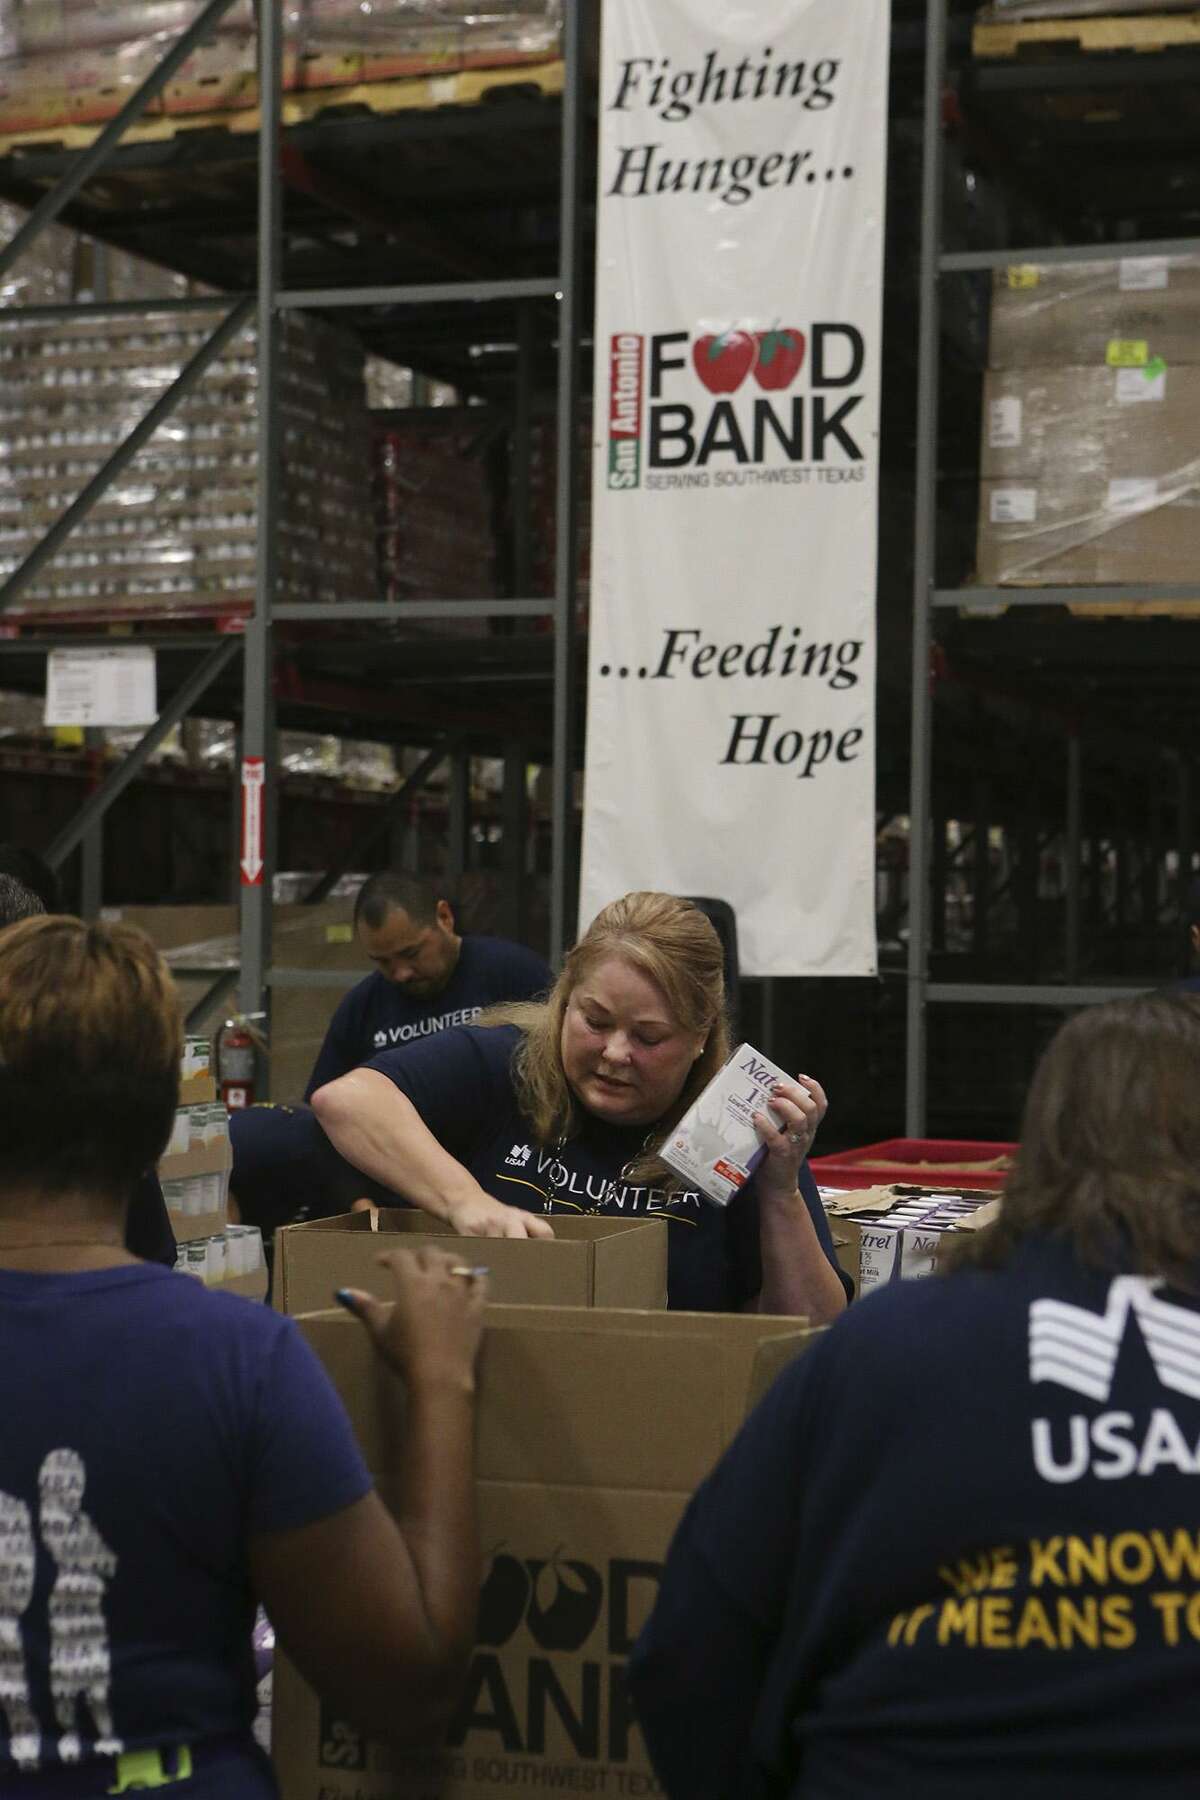 Volunteers from USAA pack boxes of food for seniors Nov. 3 at the San Antonio Food Bank. The Food Bank serves 16 counties in the San Antonio area.